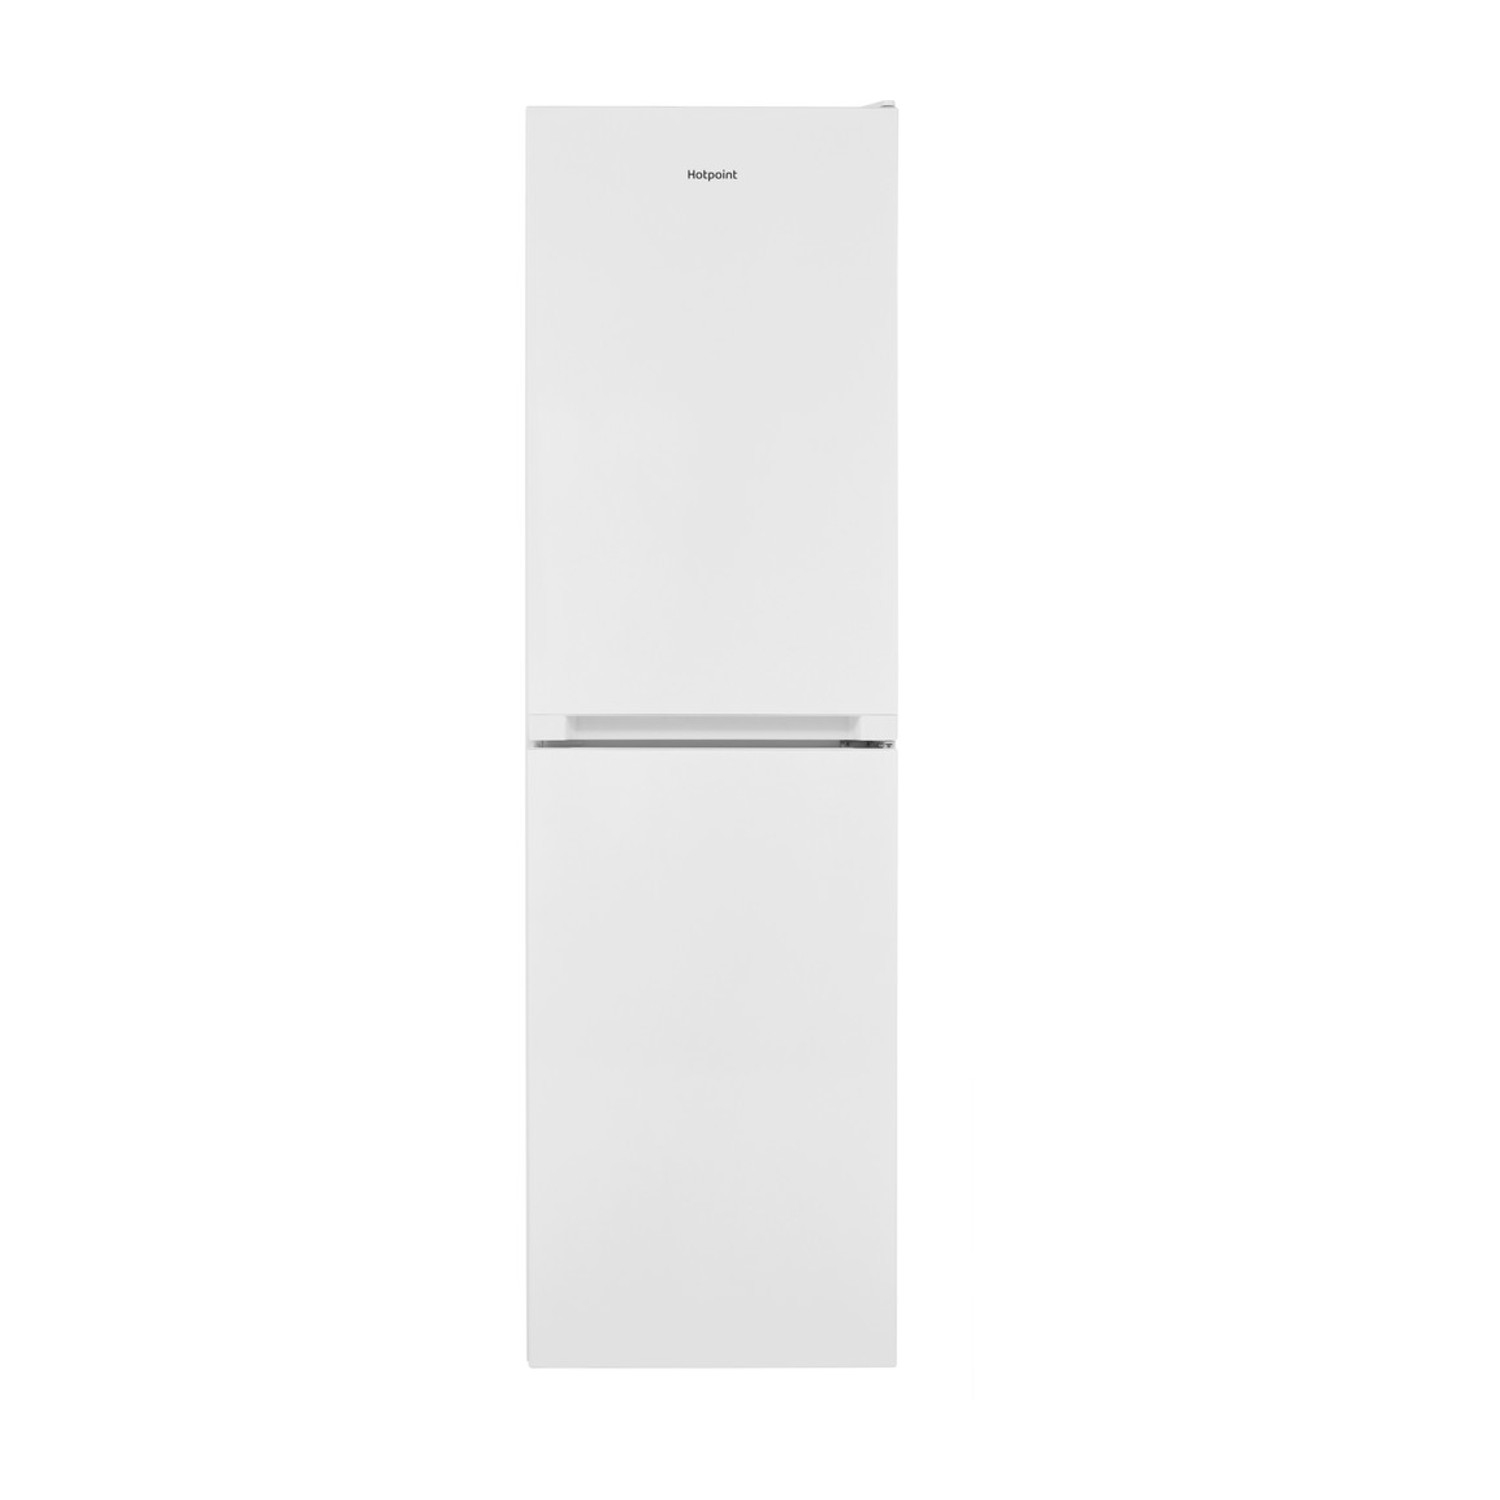 Hotpoint Frost Free Fridge Freezer - White - A+ Energy Rated - 0